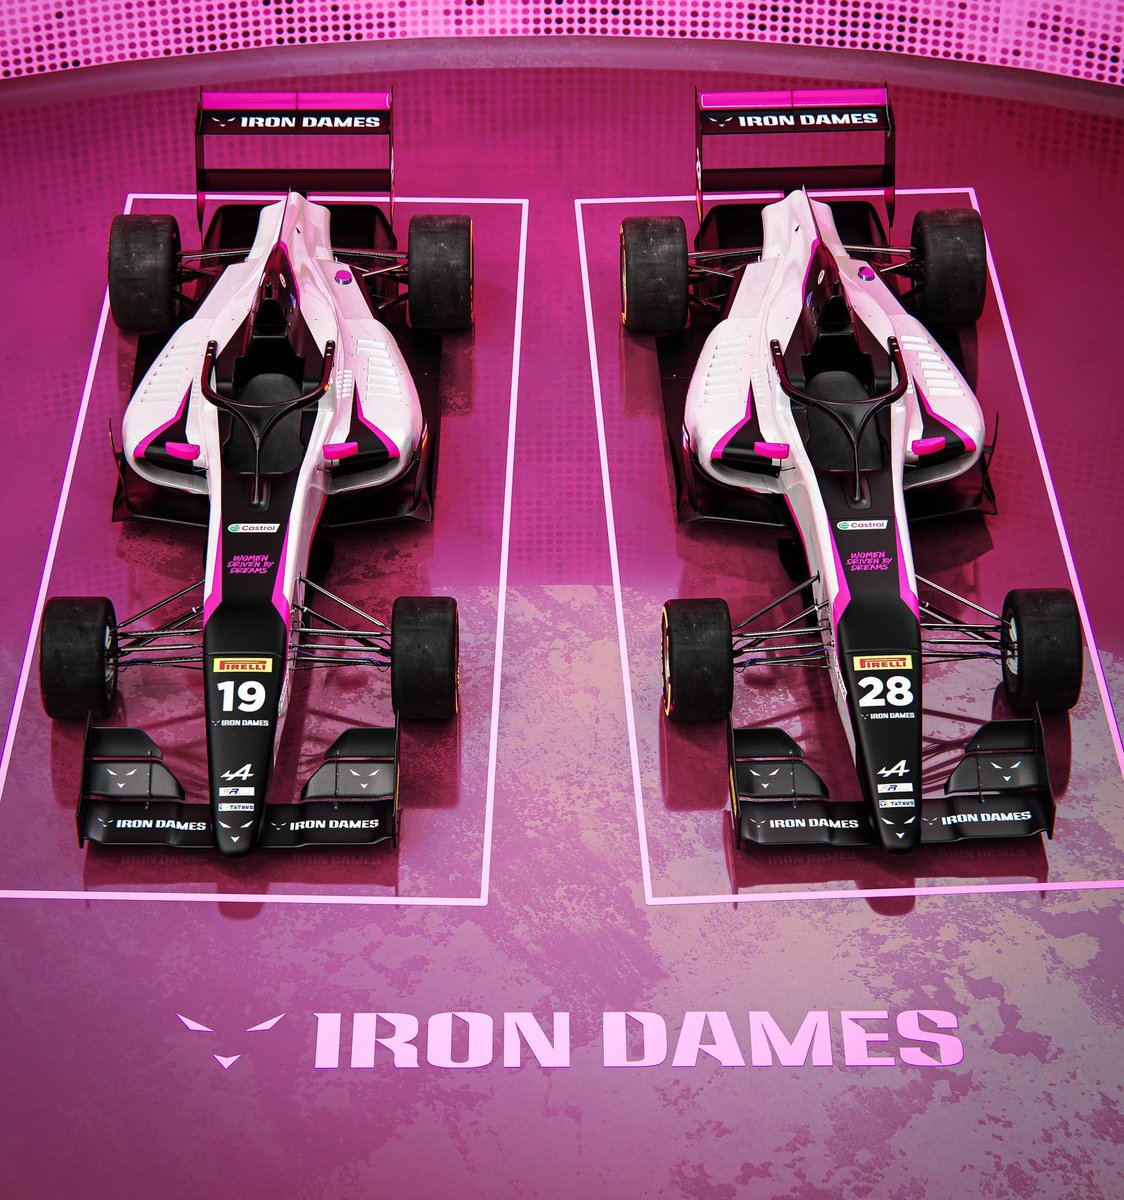 Doriane Pin joins Iron Dames FRECA line-up with inaugural F1 Academy champion Marta Garcia

With this the All female motorsport project Iron Dames enters into FRECA, expanding their motorsports projects.

A strong move for growth and participation of women in motorsports !…